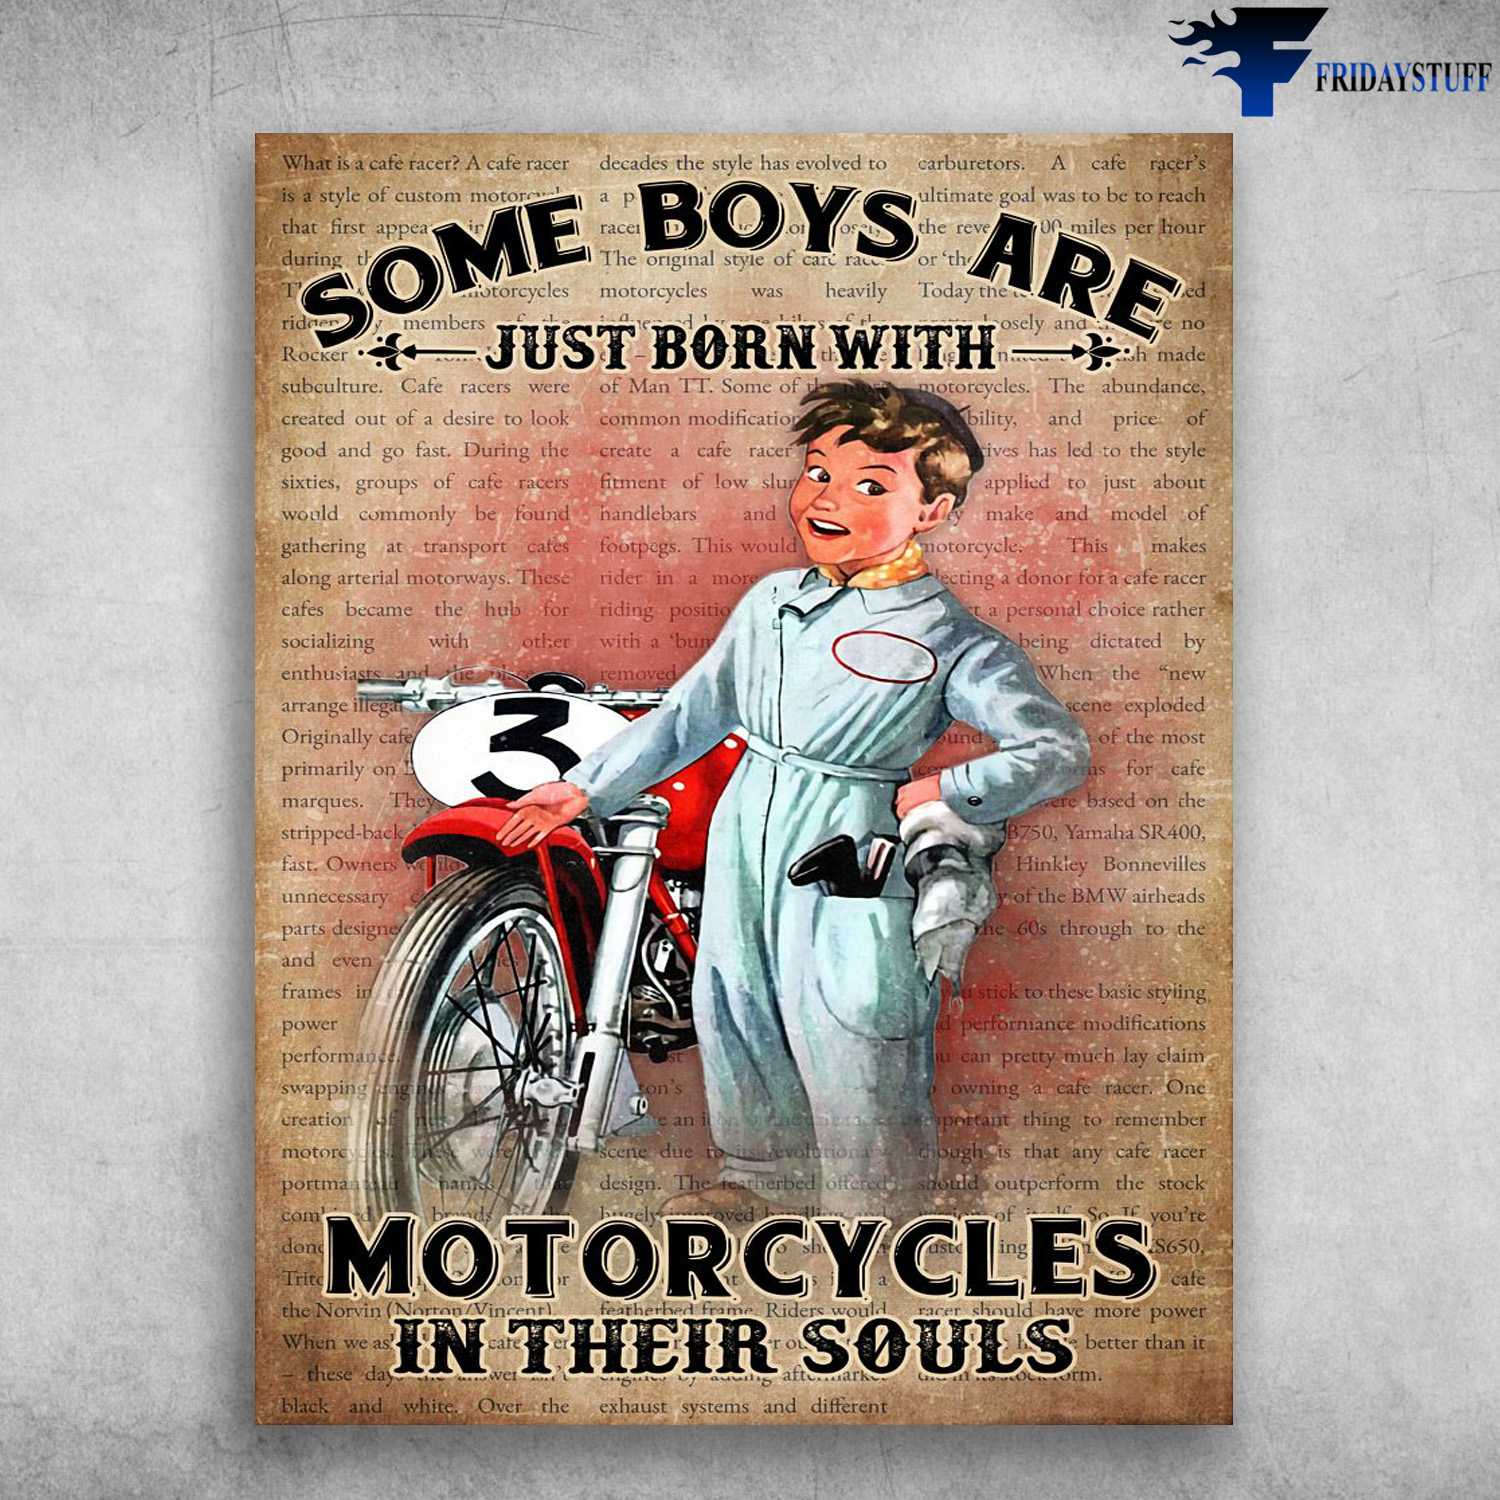 Motorcycles Boy, Biker Poster - Some Boys Are Just Born With, Motorcycles In Their Souls